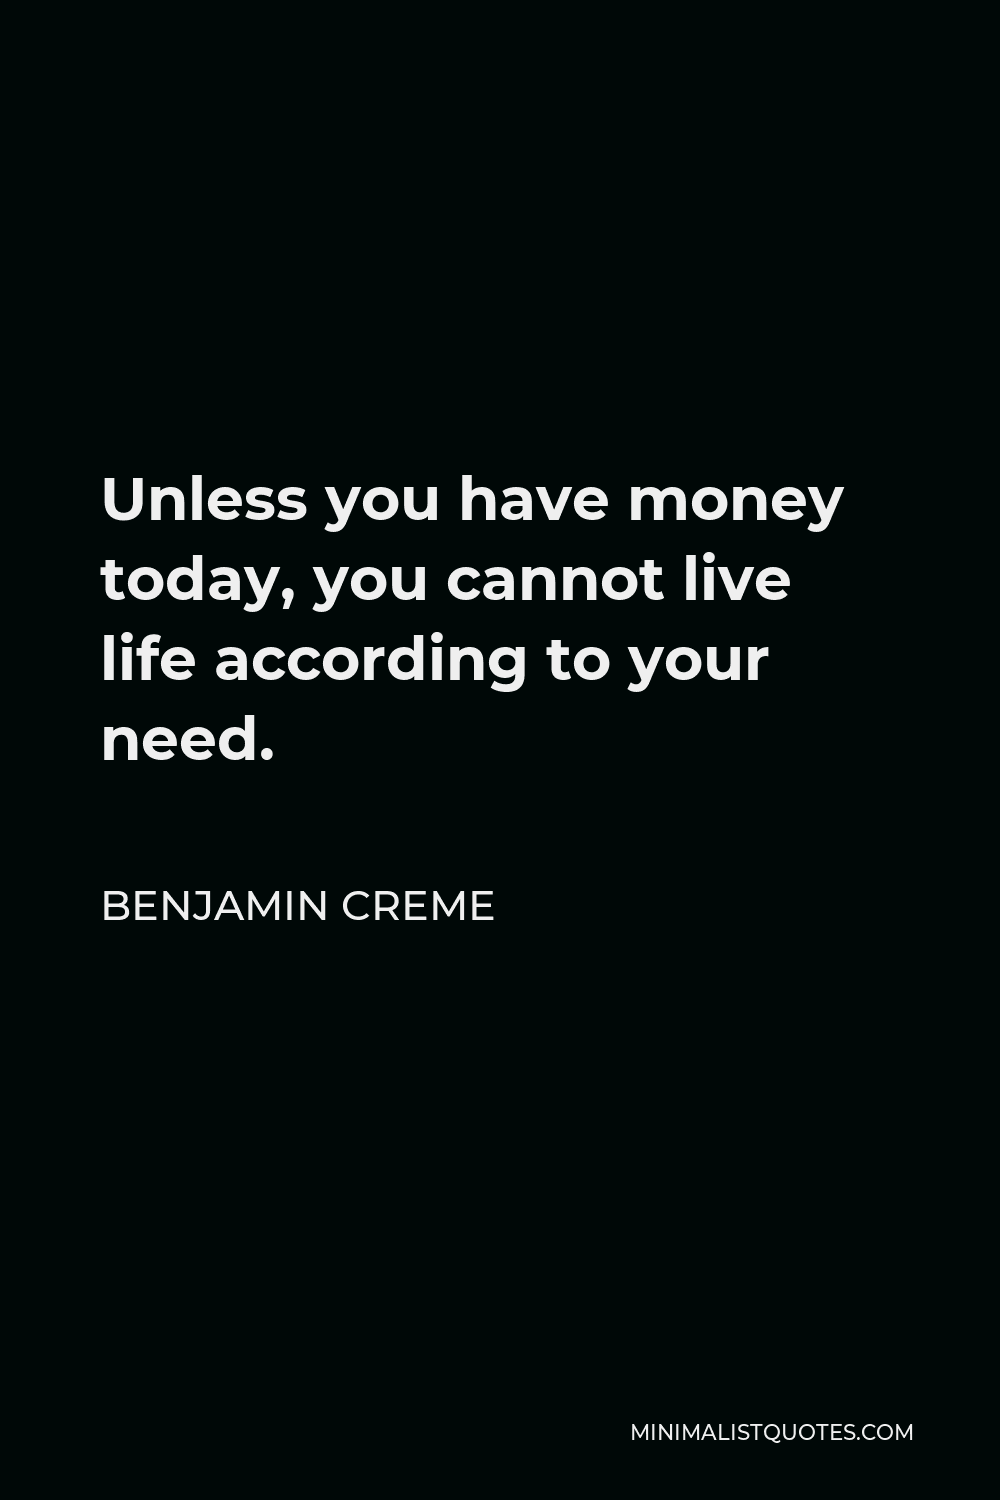 Benjamin Creme Quote - Unless you have money today, you cannot live life according to your need.